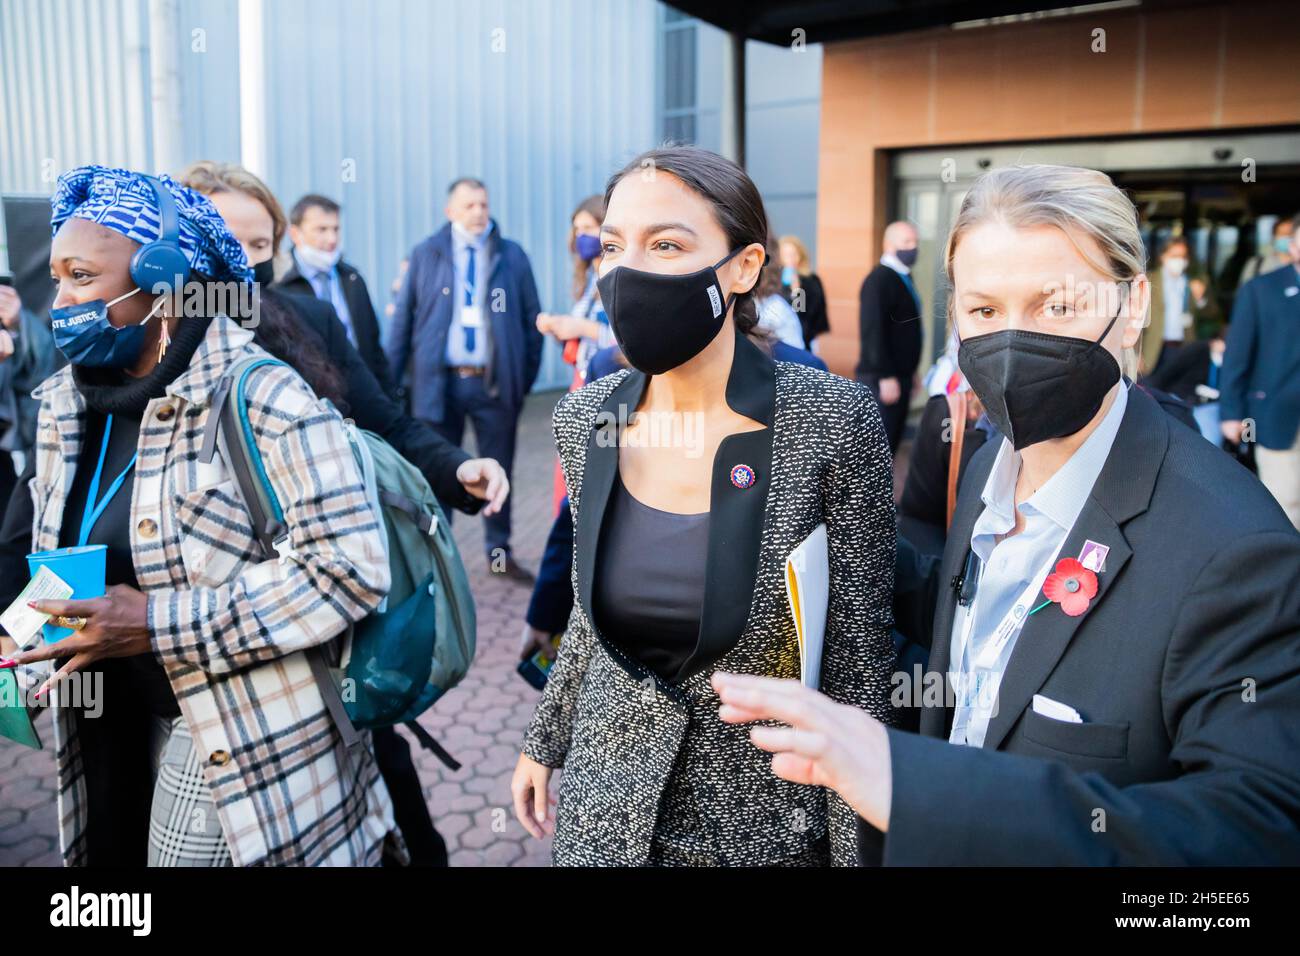 Glasgow, UK. 09th Nov, 2021. Alexandria Ocasio-Cortez (M), Democratic US Congresswoman and Representative for New York State, arrives at the UN Climate Change Conference COP26 in Glasgow. For two weeks in Glasgow, some 200 countries are wrestling with how to still achieve the goal of limiting global warming to 1.5 degrees compared to pre-industrial times, if possible. Credit: Christoph Soeder/dpa/Alamy Live News Stock Photo